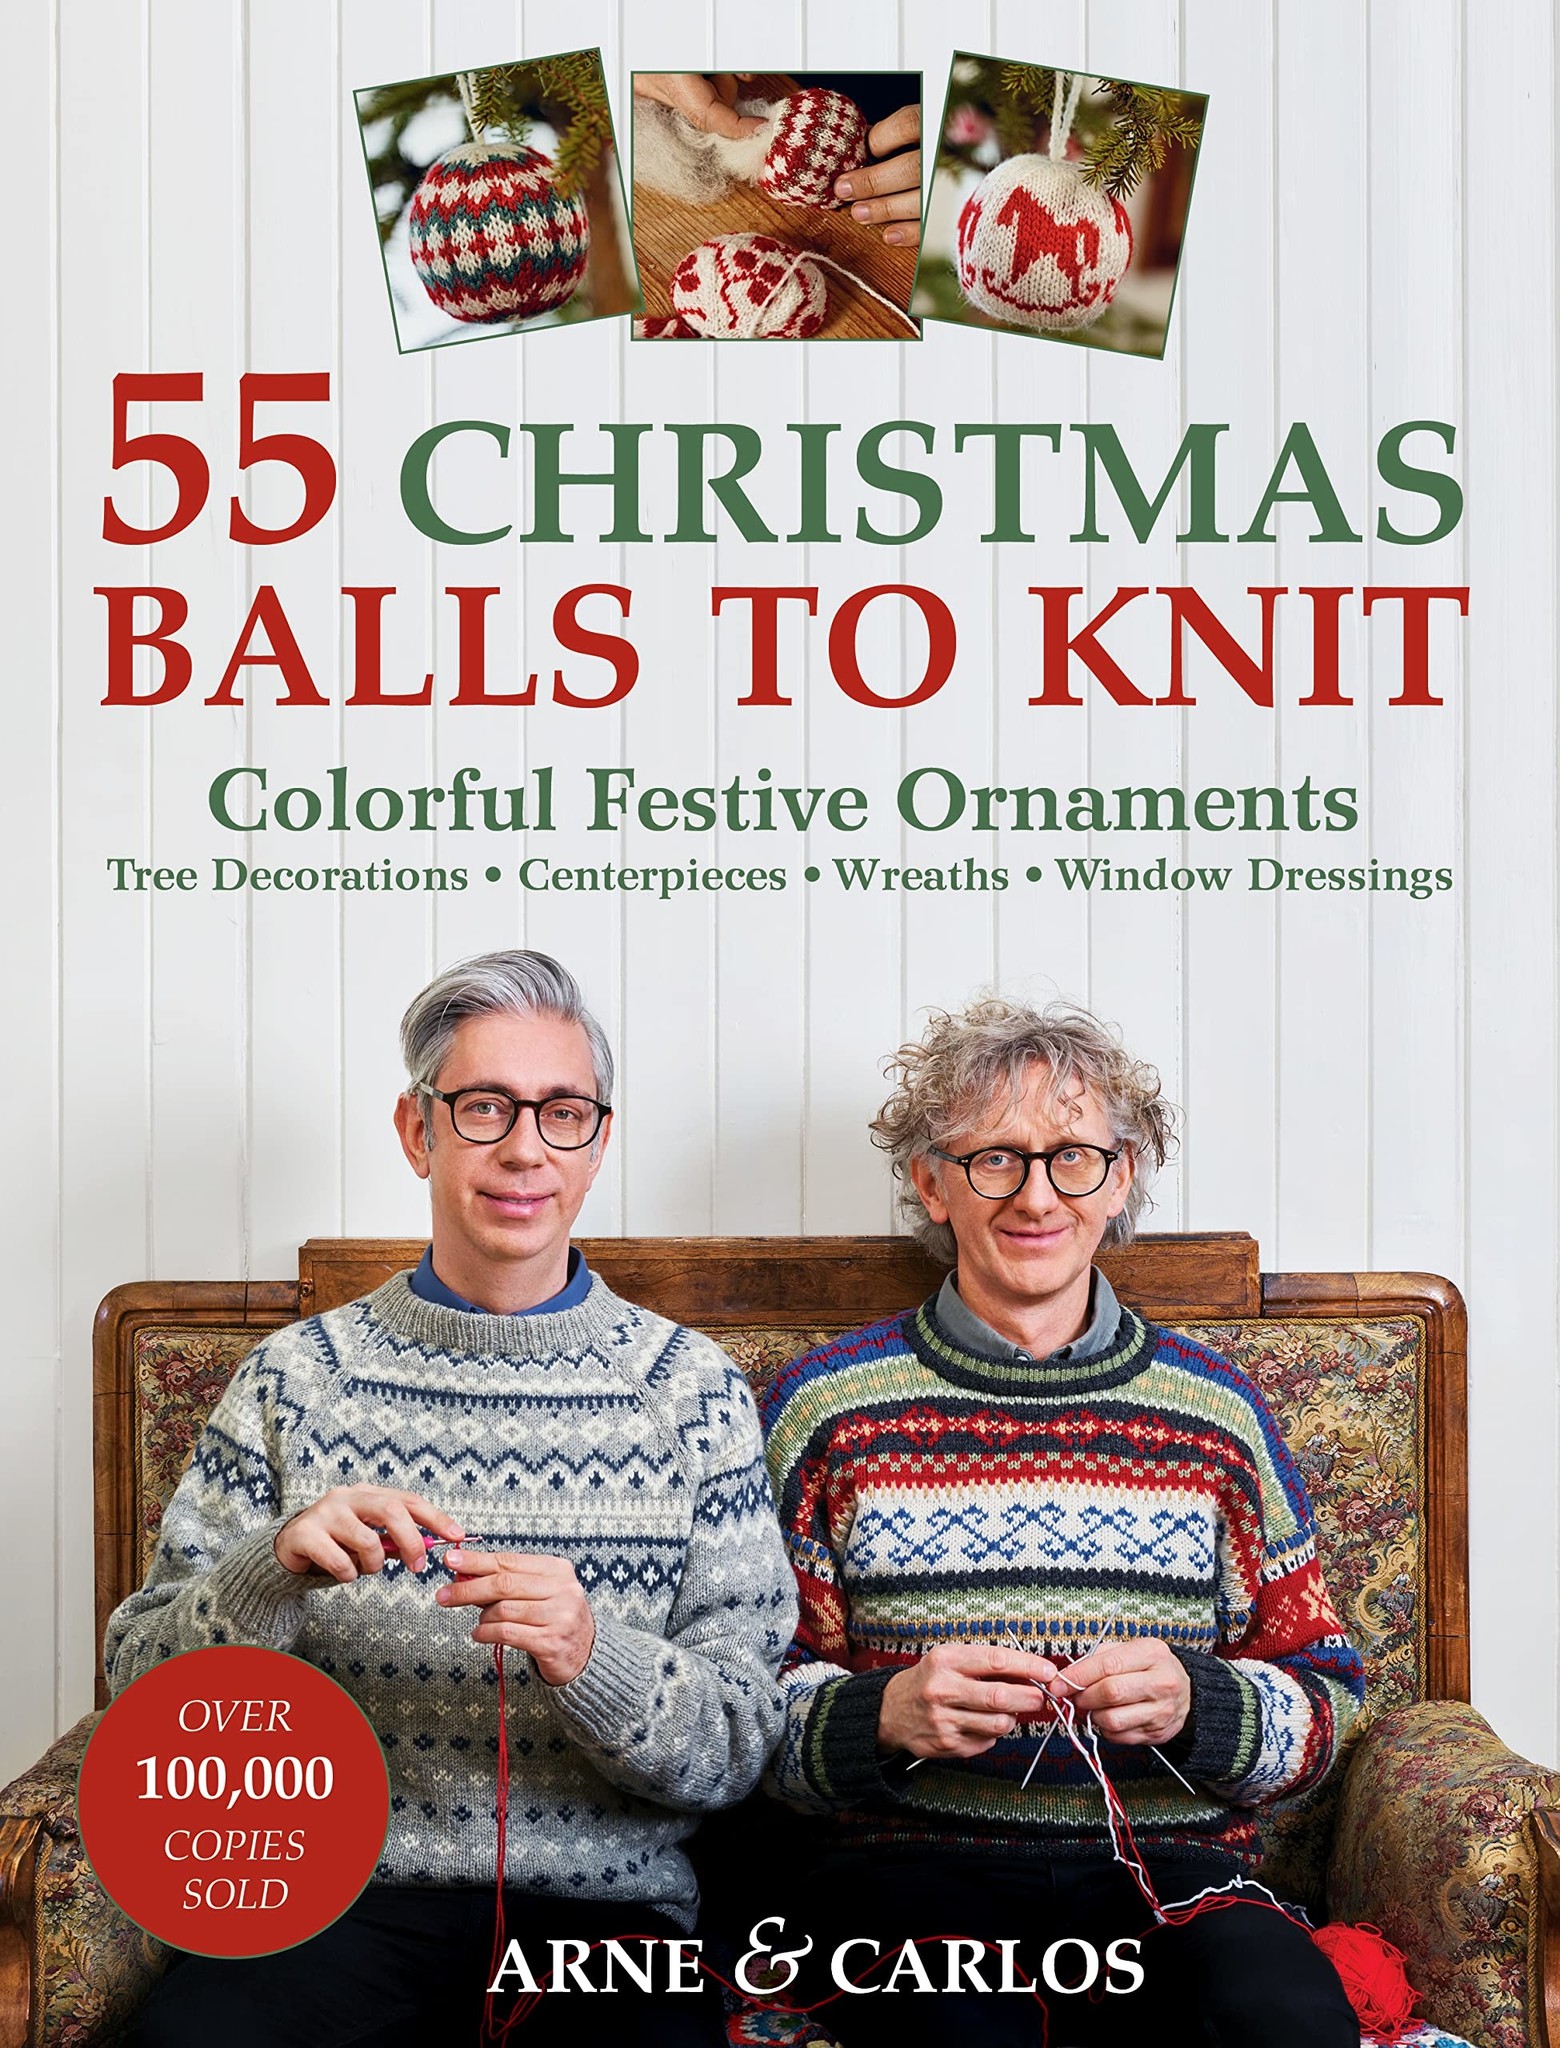 55 Christmas Balls to Knit by Arne & Carlos